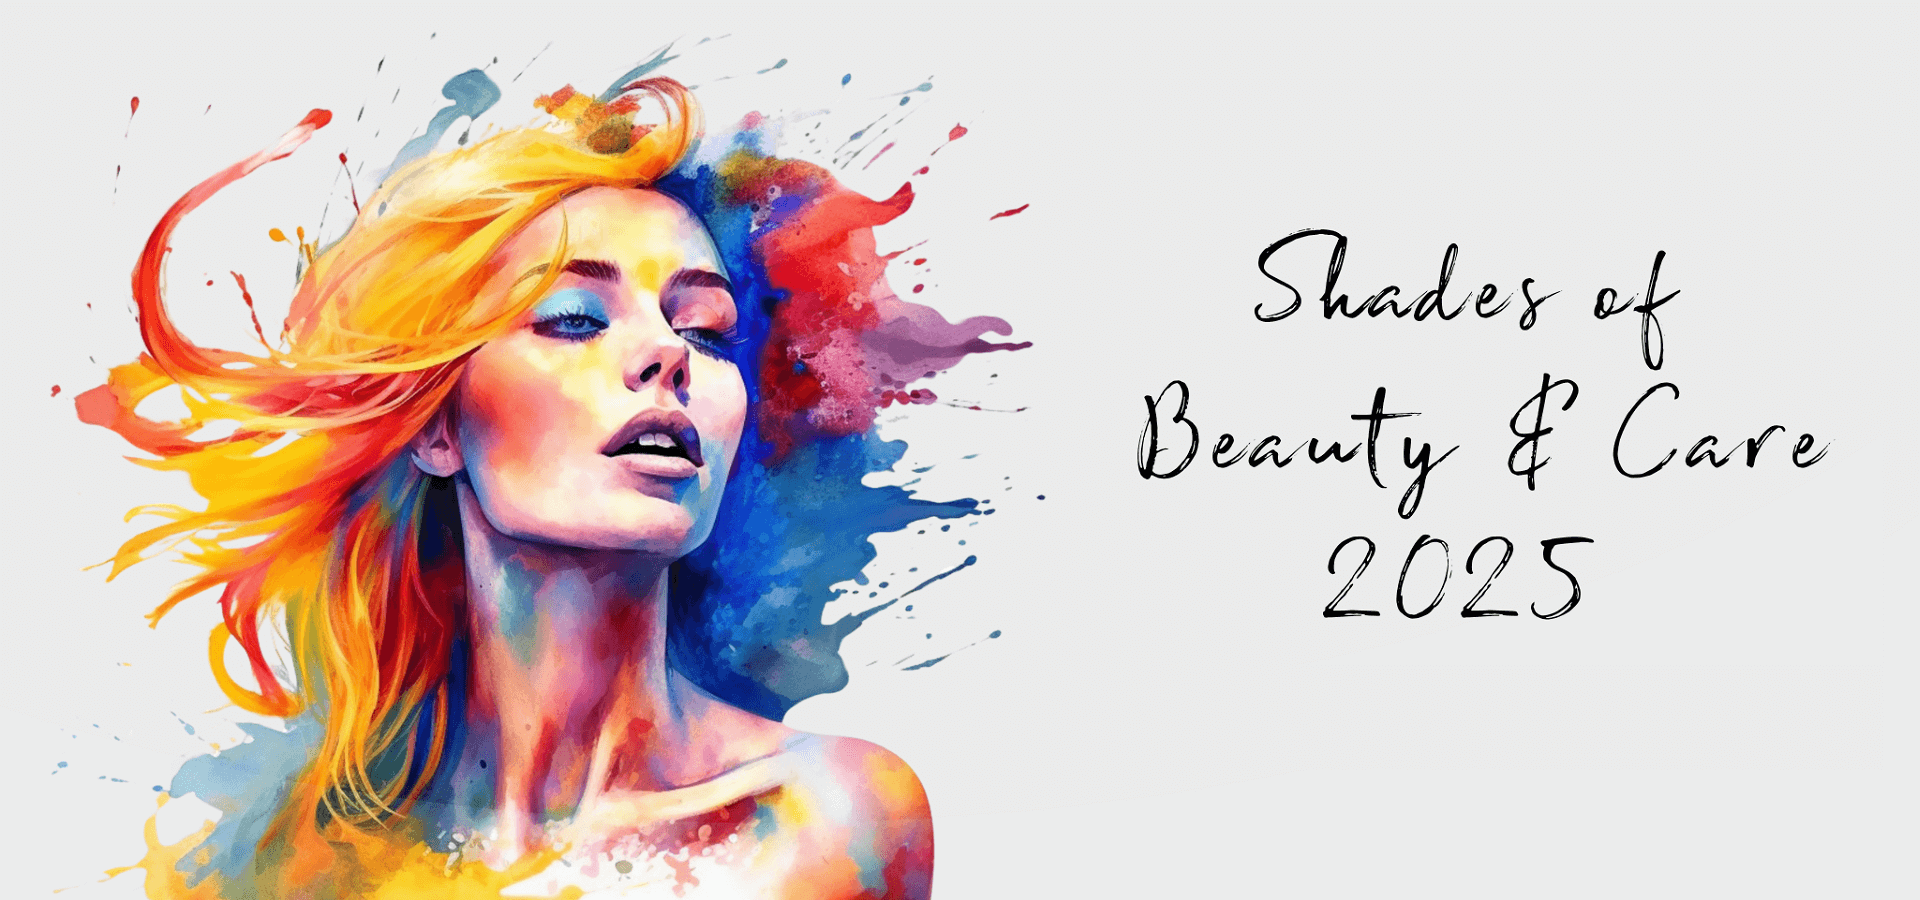 Shades of Beauty & Care 2025